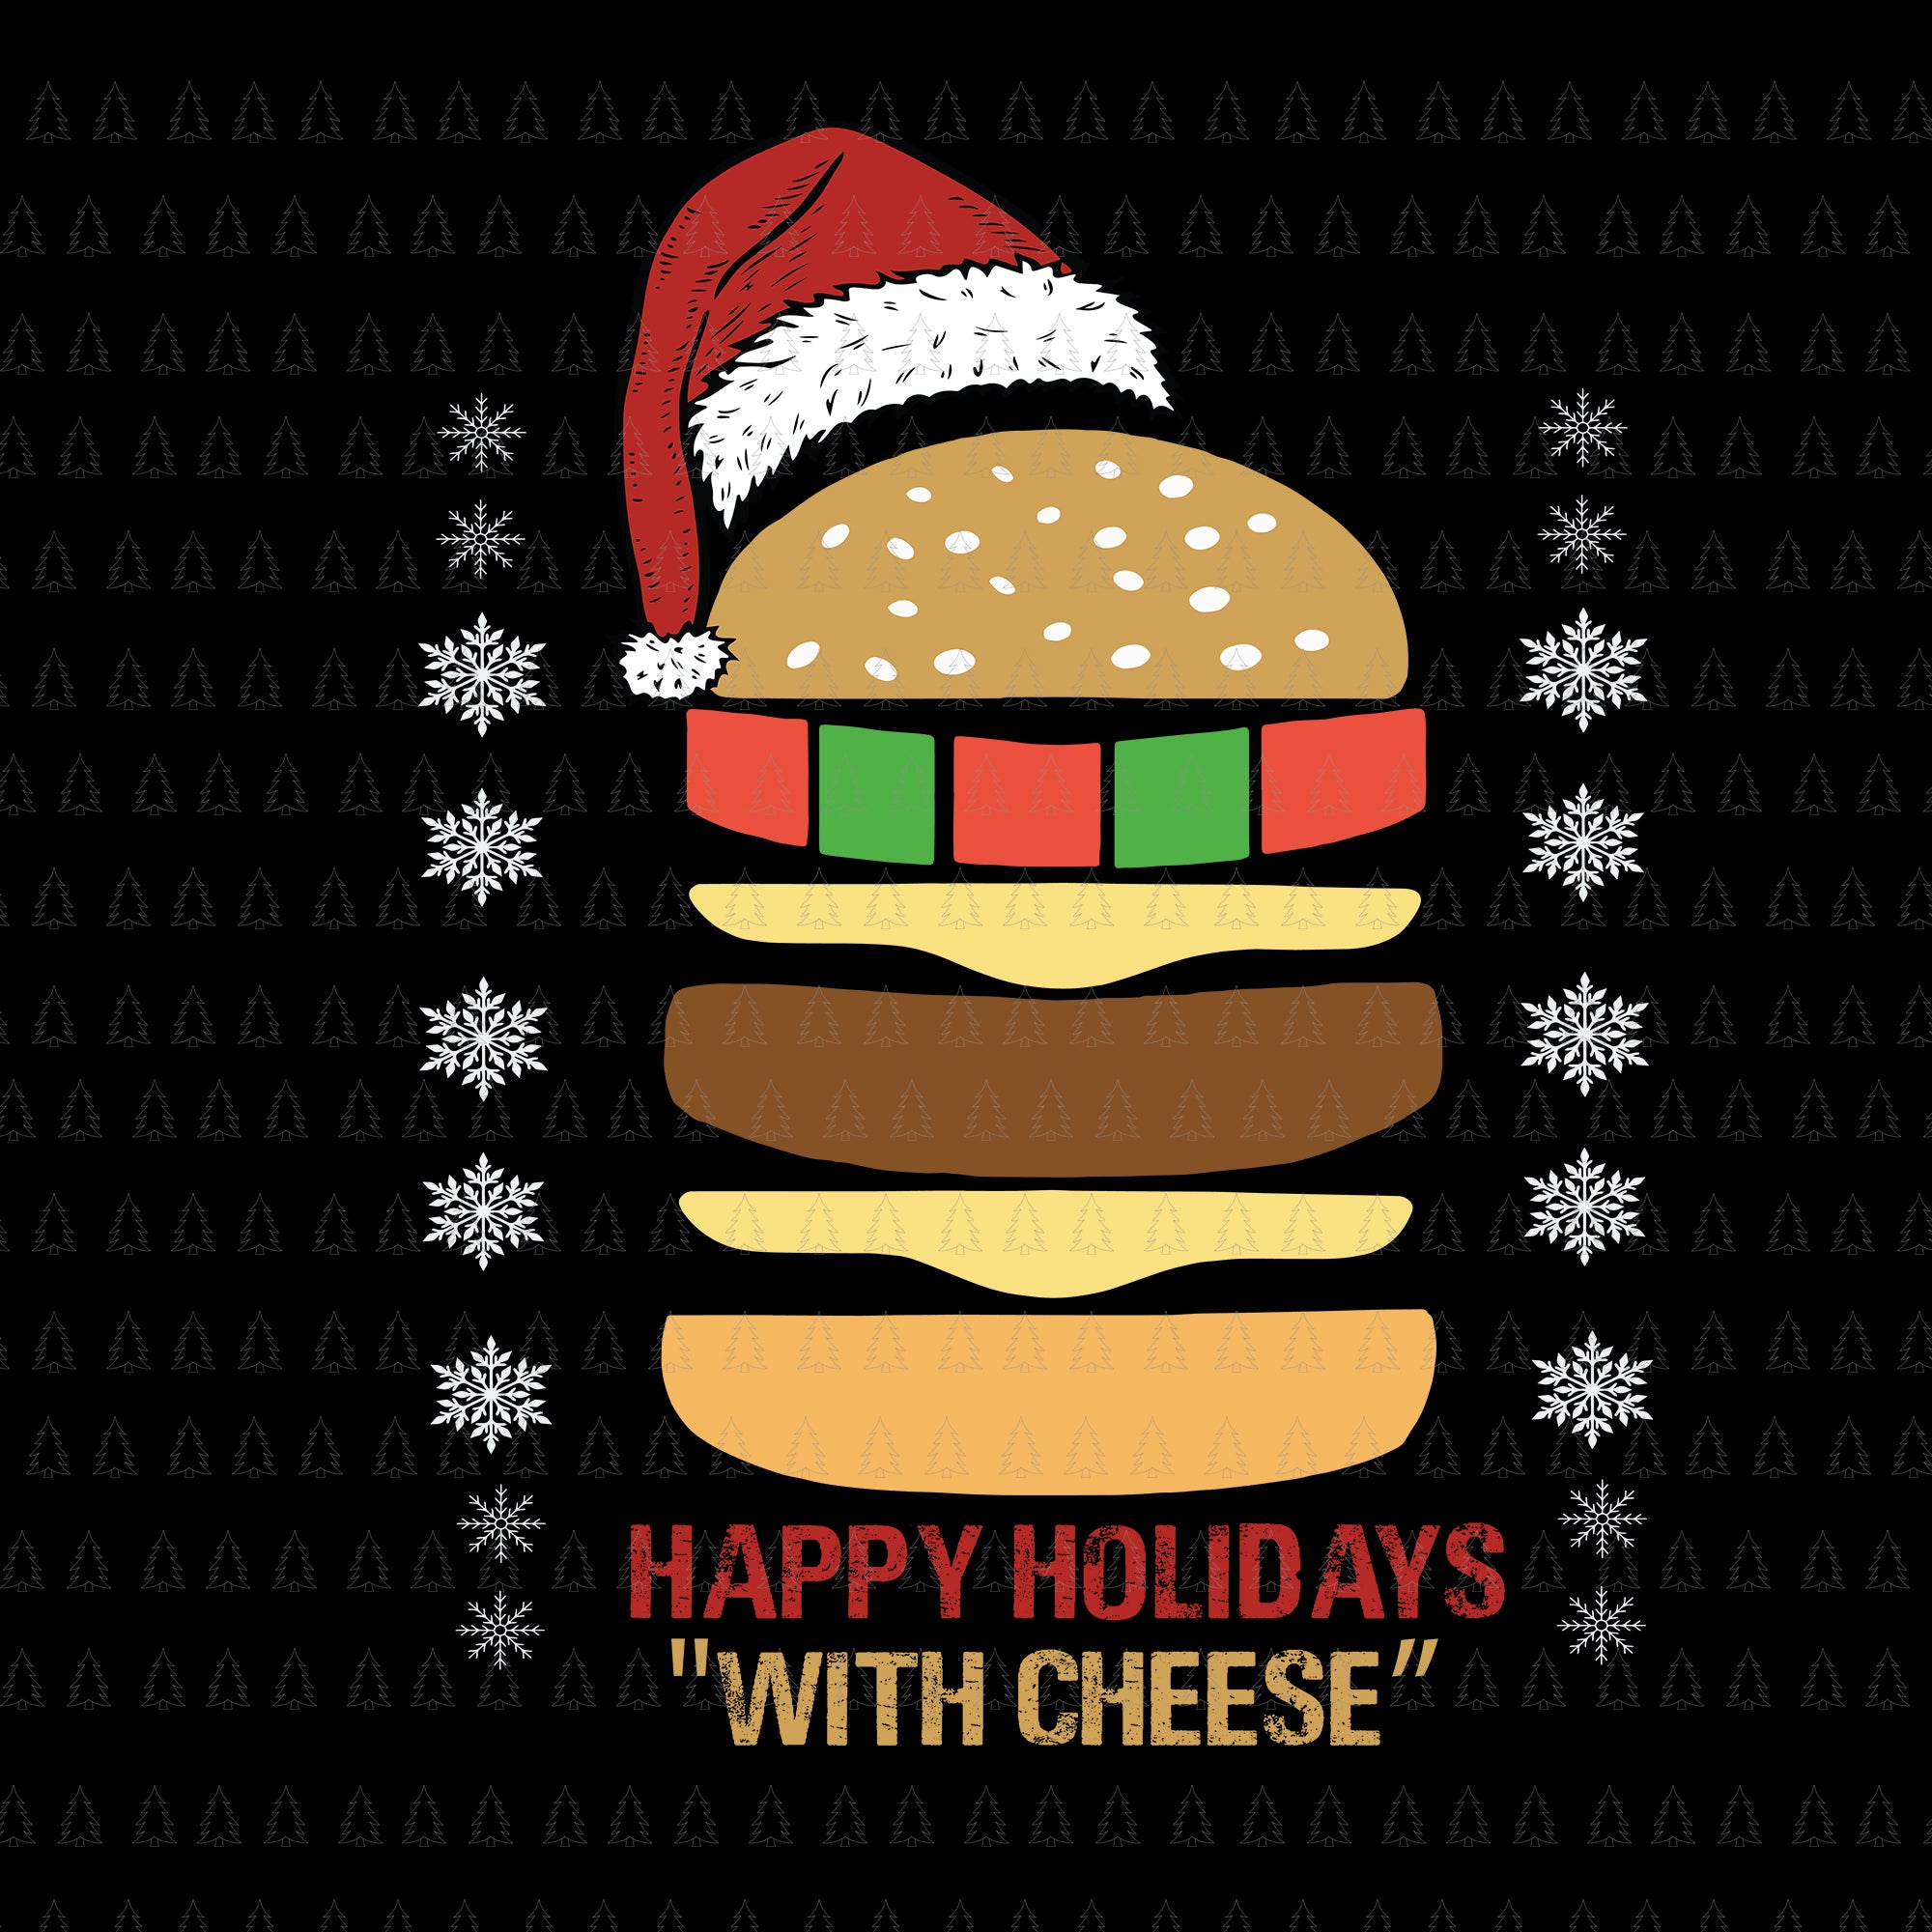 Happy Holidays with Cheese Christmas, Happy Holidays with Cheese SVG, Happy Holidays with Cheese Christmas cheeseburger, christmas svg, christmas vector, eps, dxf, png, svg file